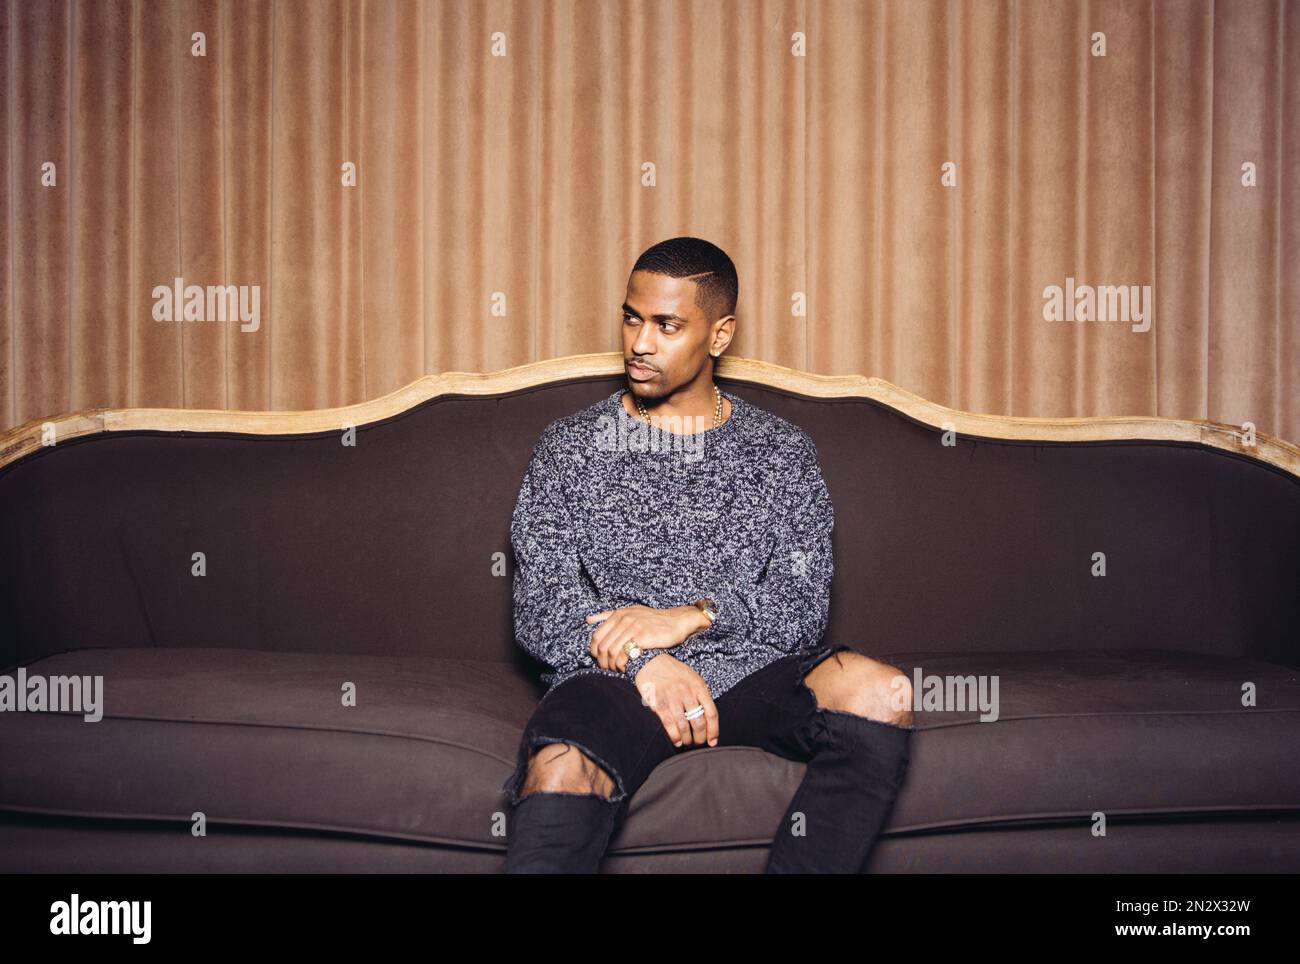 FILE - In this Feb. 19, 2015 file photo, singer Big Sean poses for a portrait at The Redbury Hotel in Los Angeles to promote his latest album, "Dark Sky Paradise." (Photo by Casey Curry/Invision/AP, File) Stock Photo